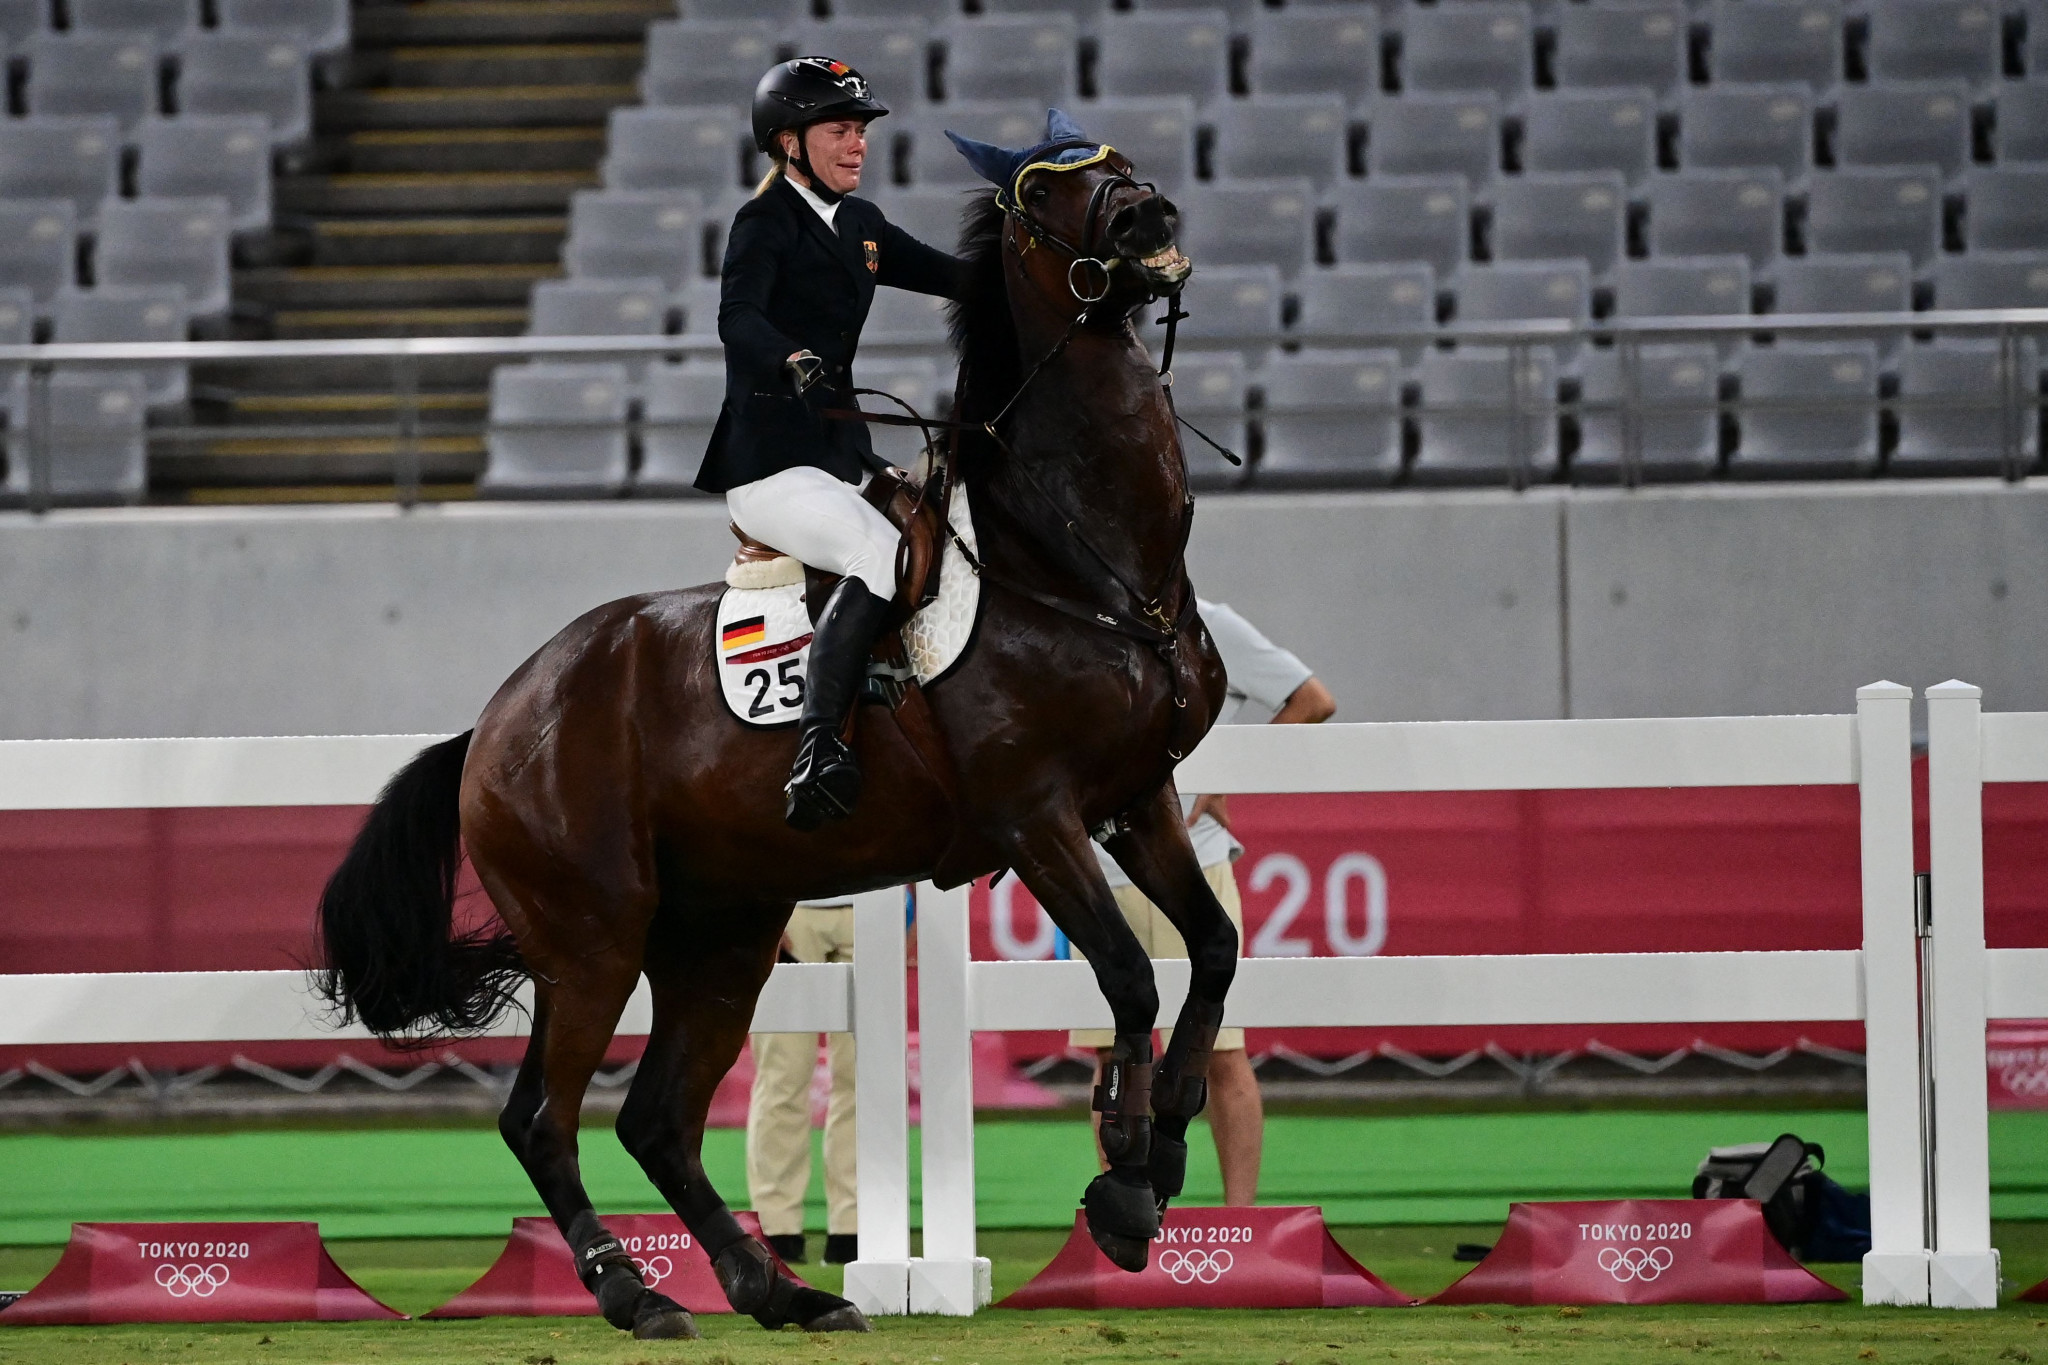 Germany's Annika Schleu had led the women's modern pentathlon competition at Tokyo 2020 before Saint Boy refused to jump ©Getty Images